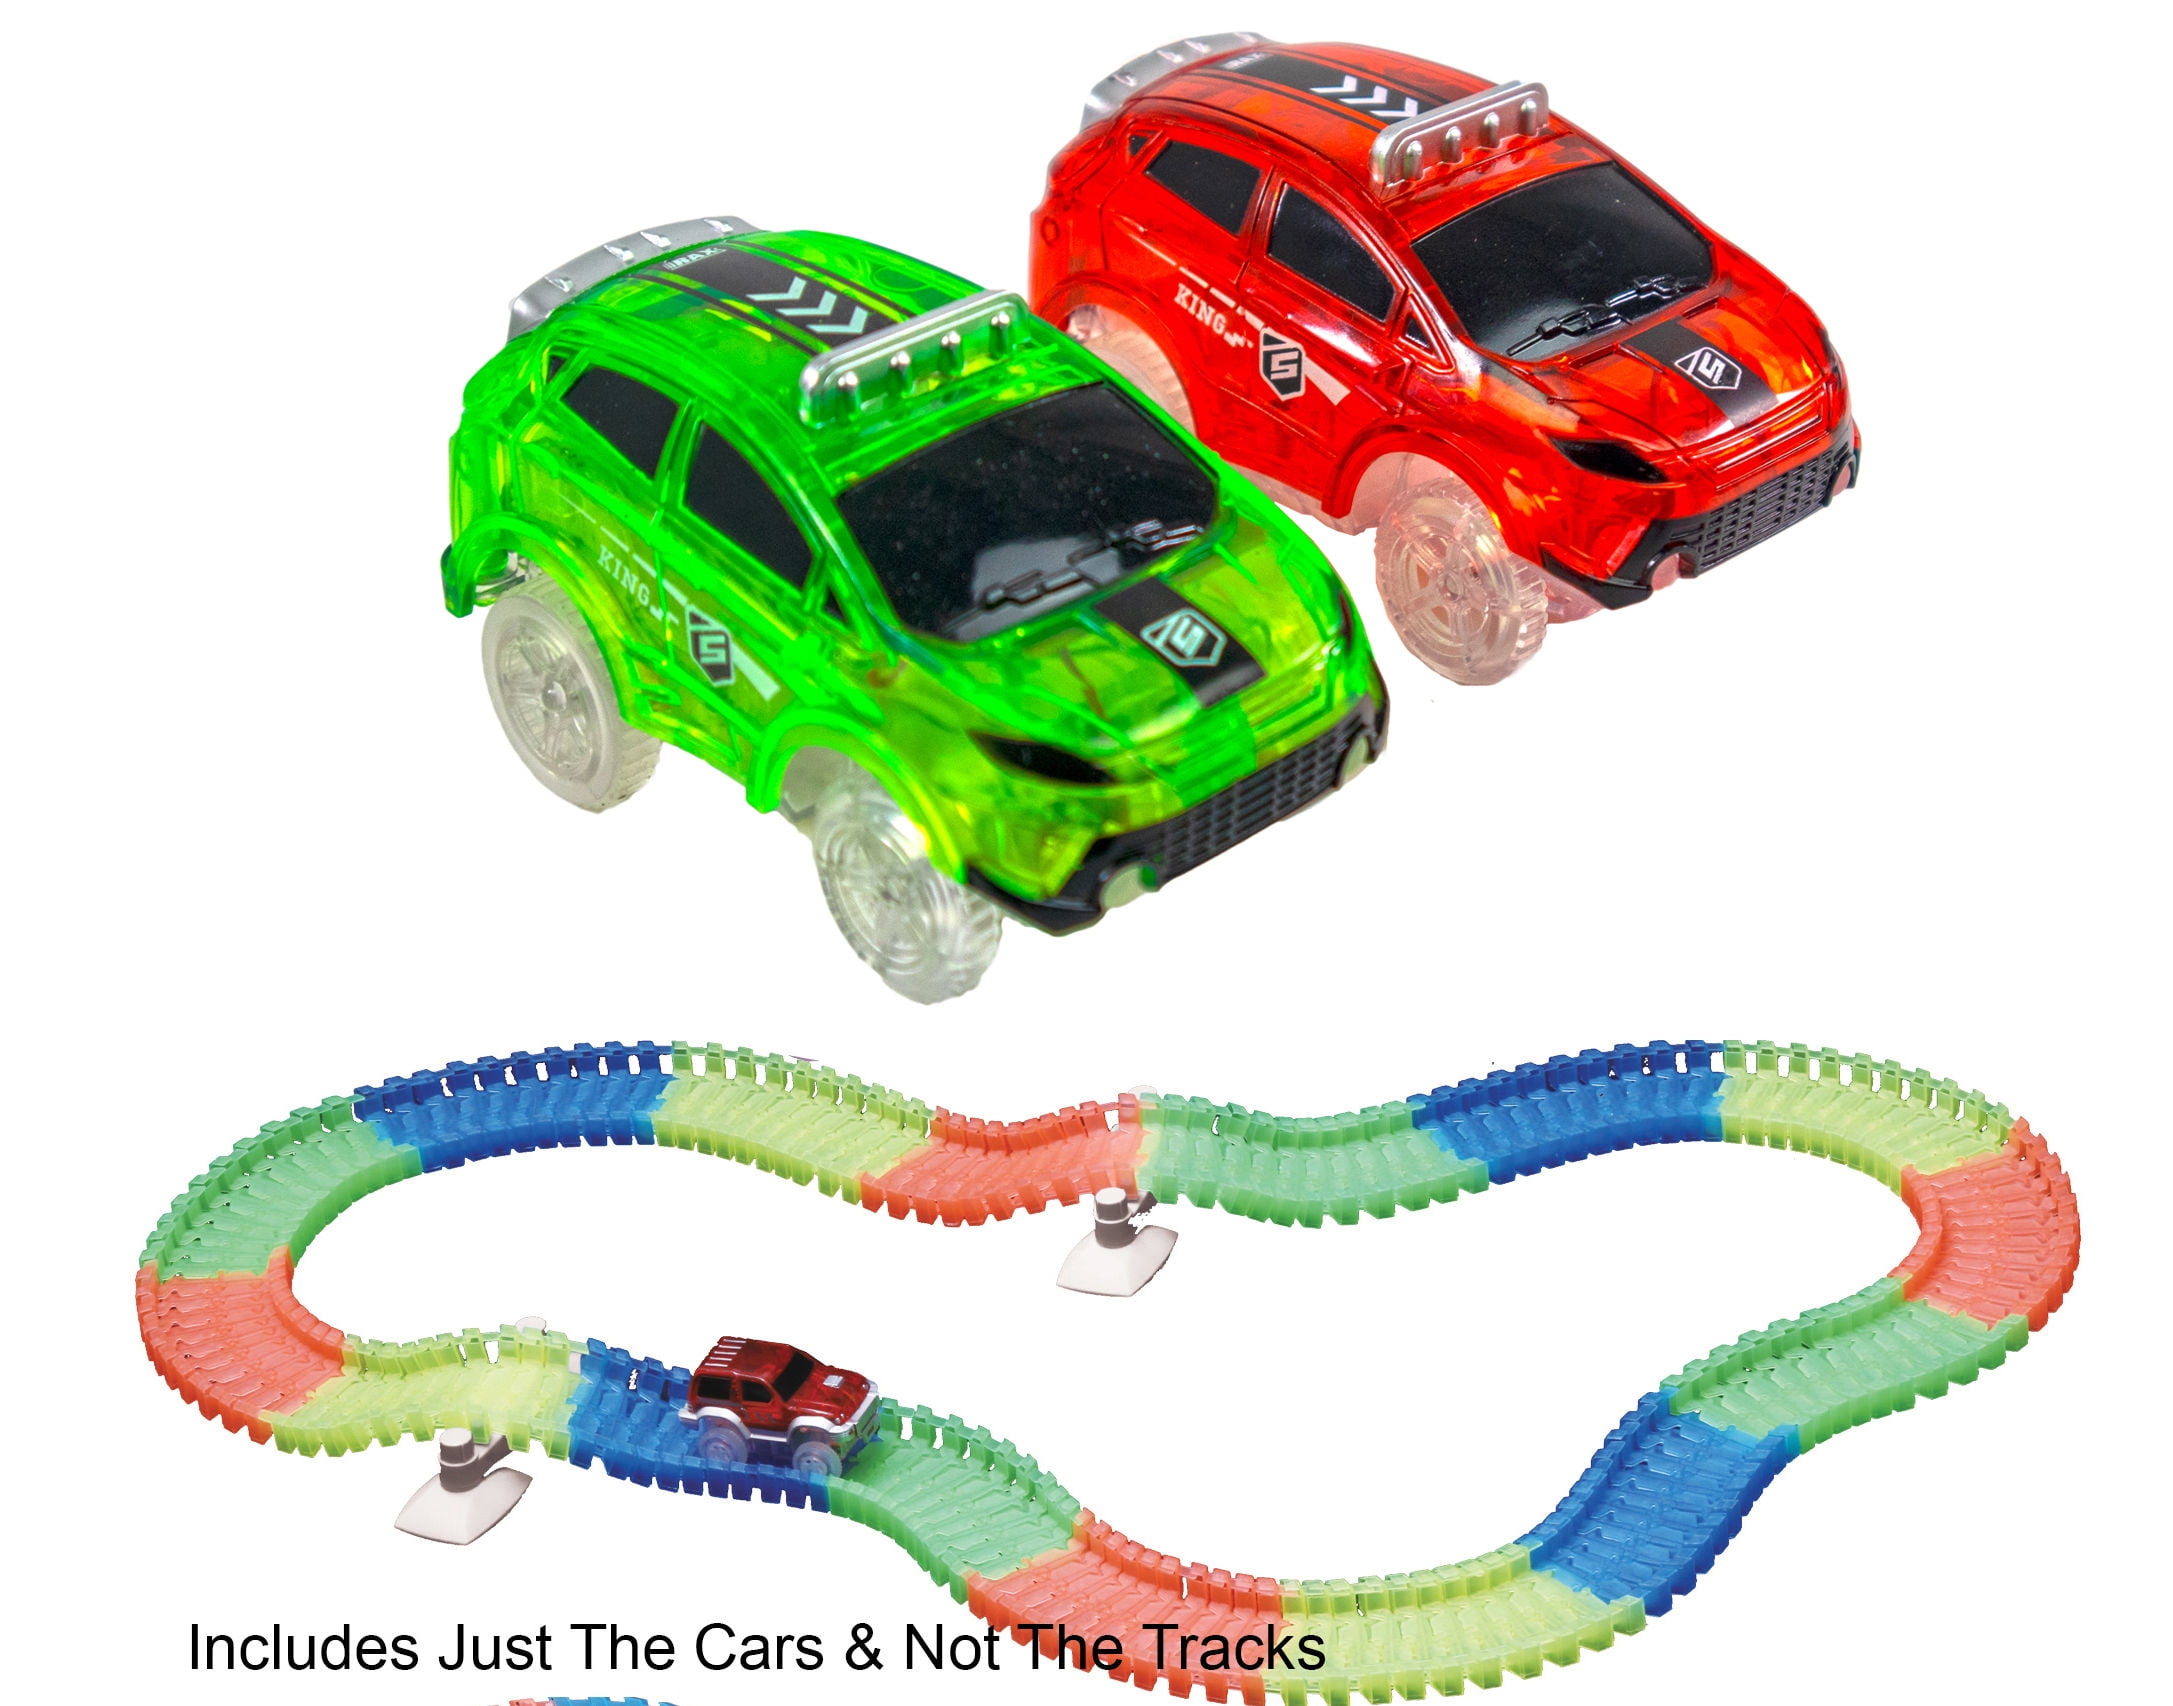 Cars for Magic Tracks Glow in the Dark Amazing Racetrack Light Up Car Race New!